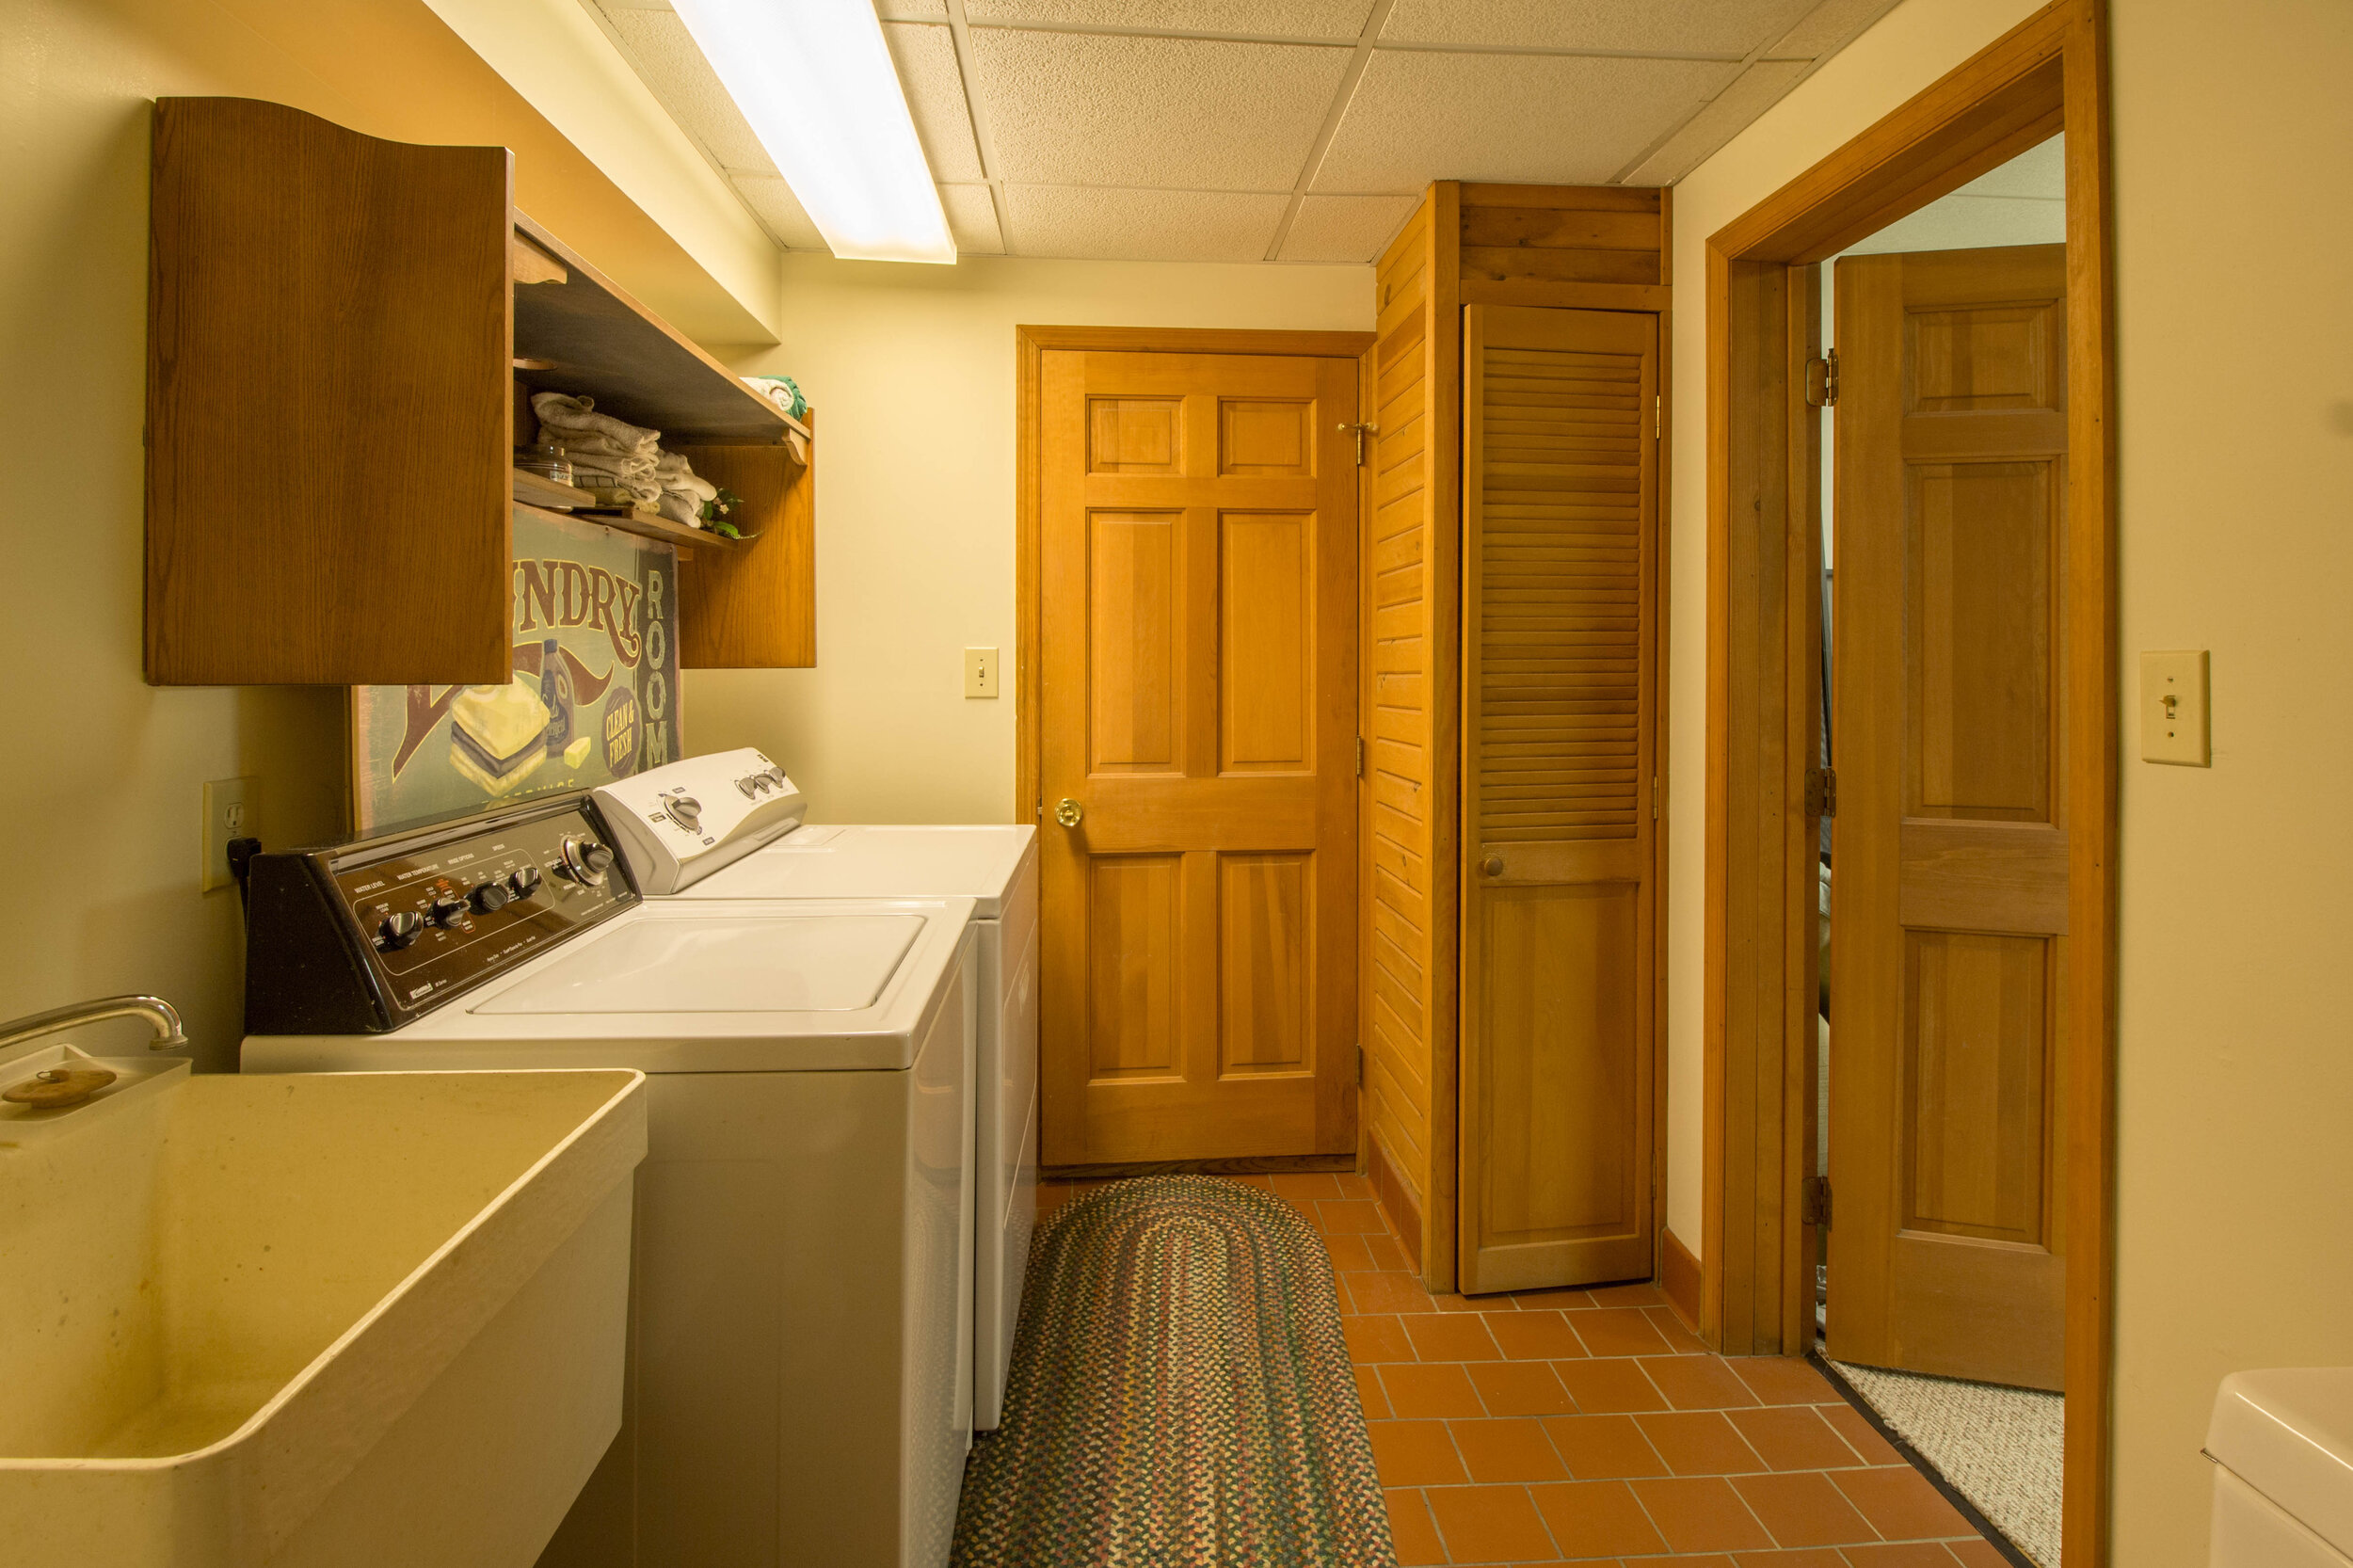  Laundry room with double sliding doors that open to it.  Washer and dryer are in this room along with a stand alone wash tub. 